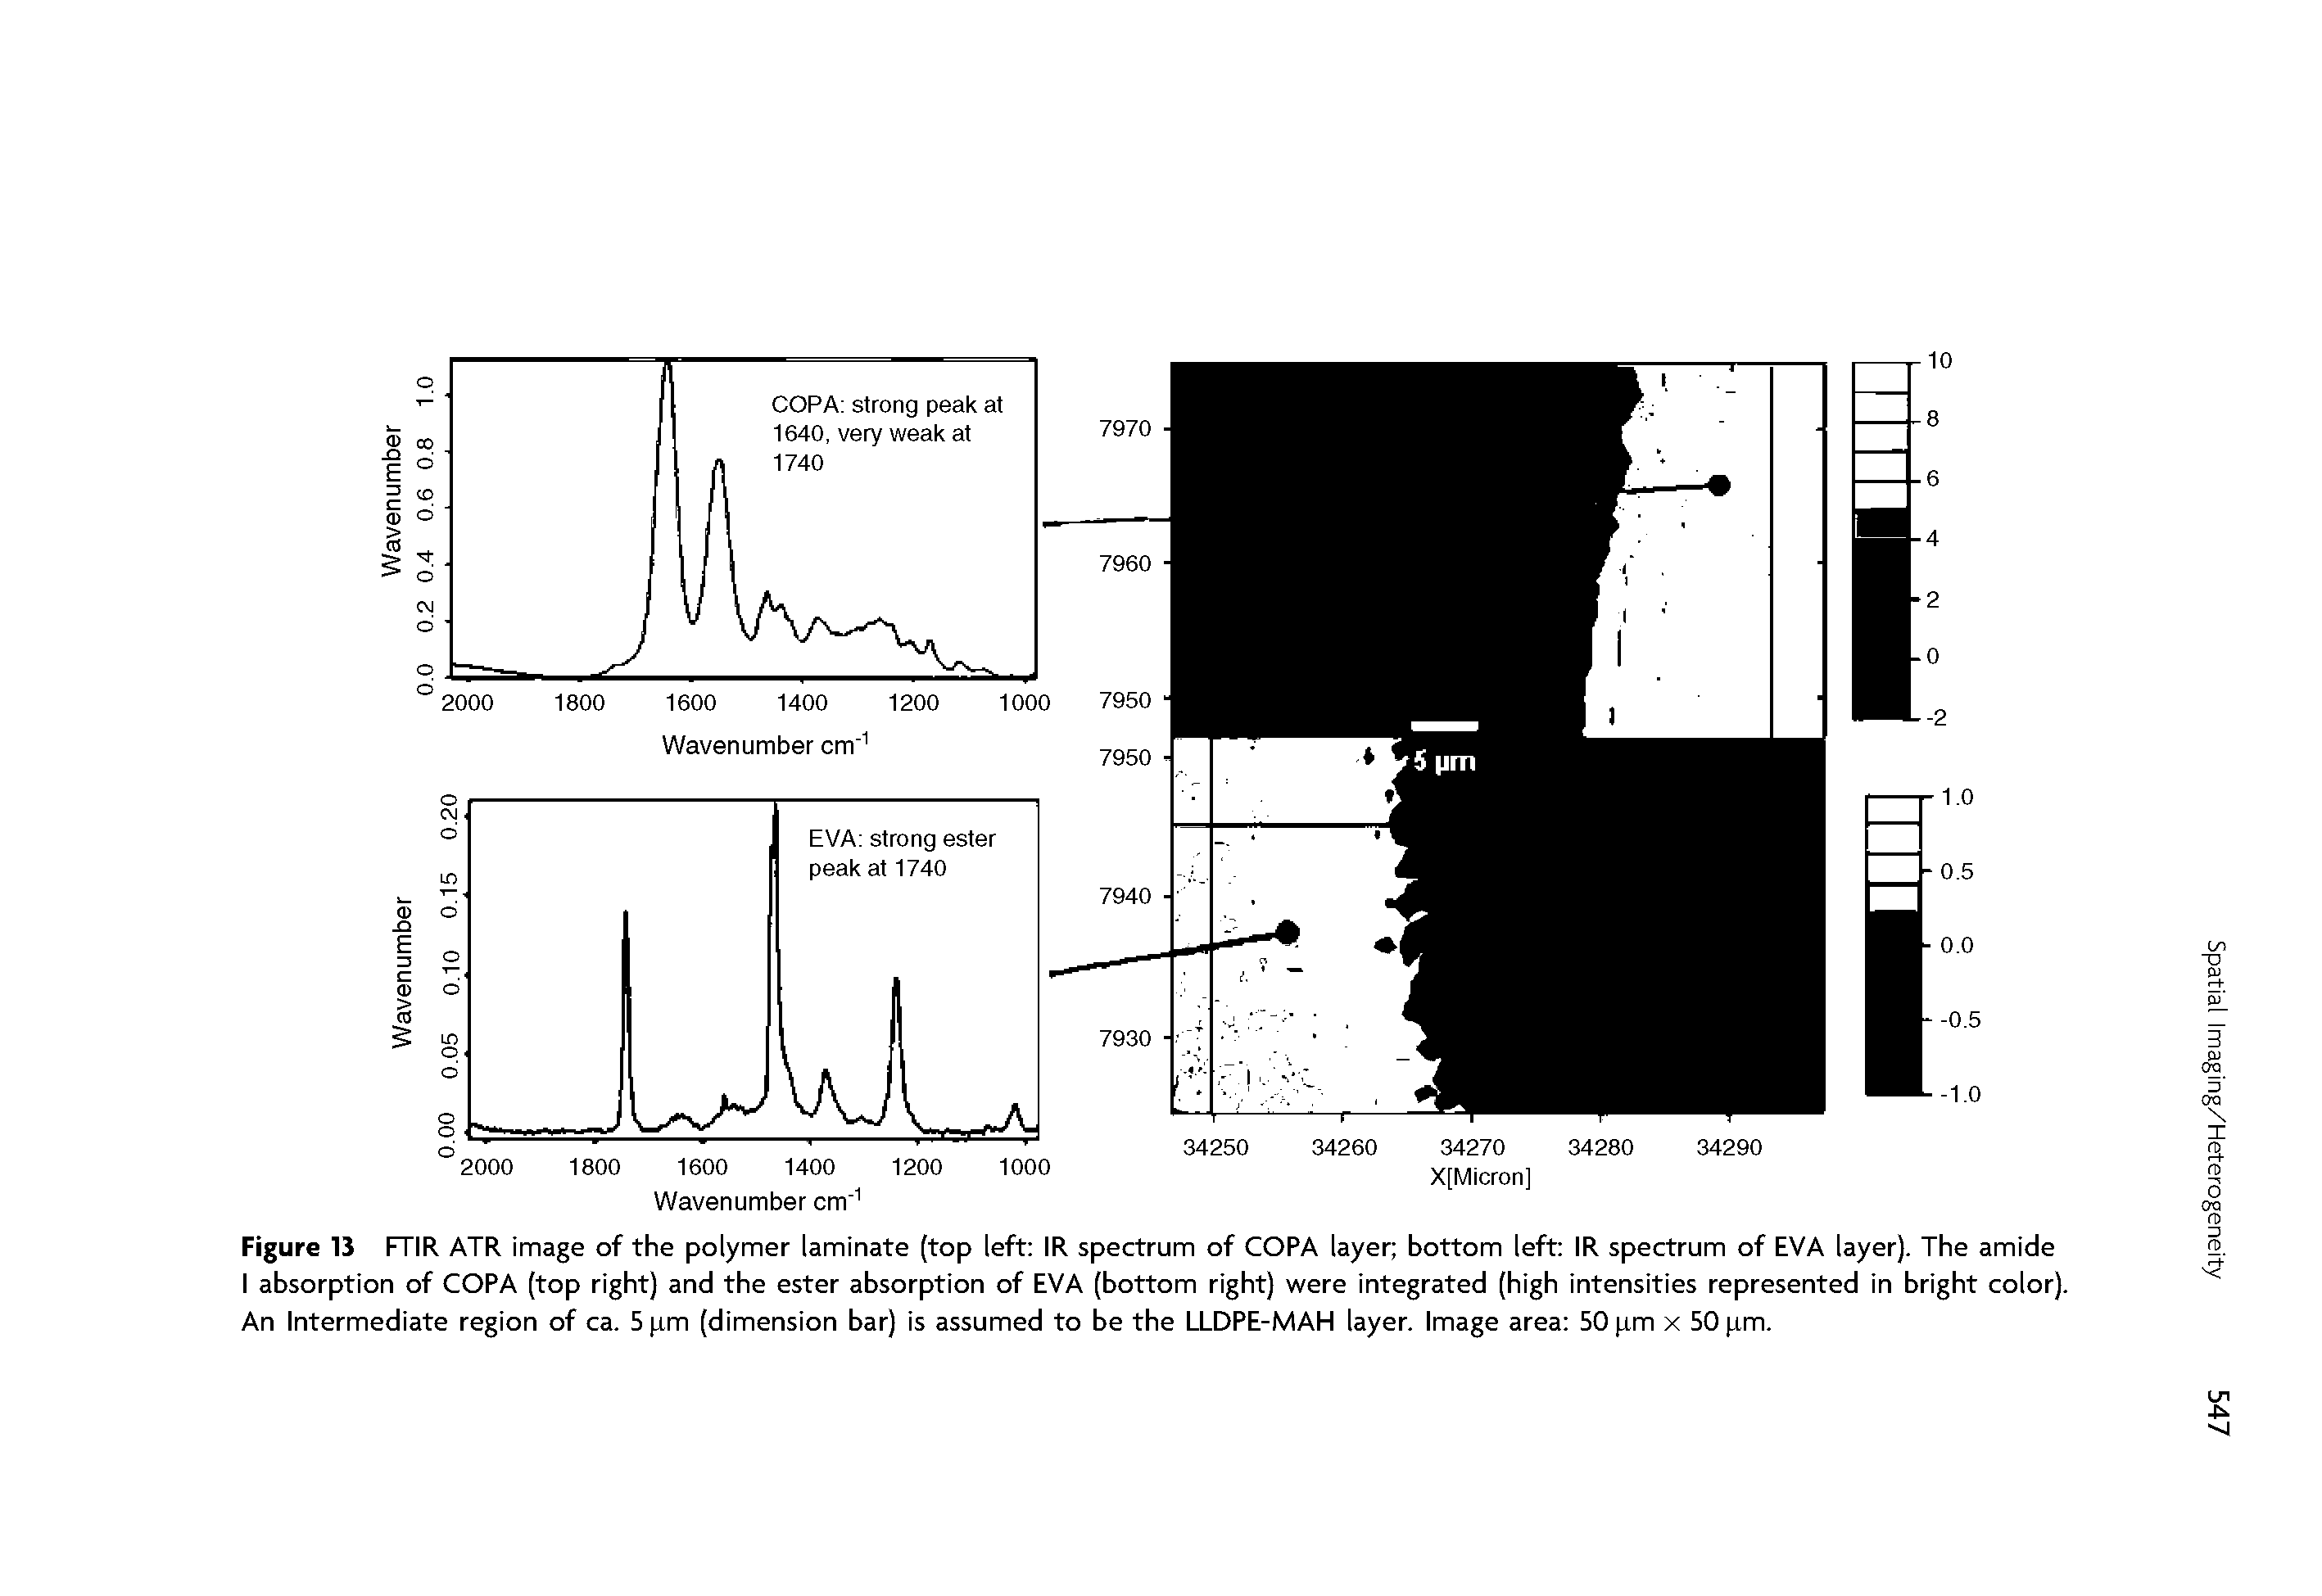 Figure 13 FTIR ATR image of the polymer laminate (top left IR spectrum of COPA layer bottom left IR spectrum of EVA layer). The amide I absorption of COPA (top right) and the ester absorption of EVA (bottom right) were integrated (high intensities represented in bright color). An Intermediate region of ca. 5 pm (dimension bar) is assumed to be the LLDPE-MAH layer. Image area 50 pm x 50 pm.